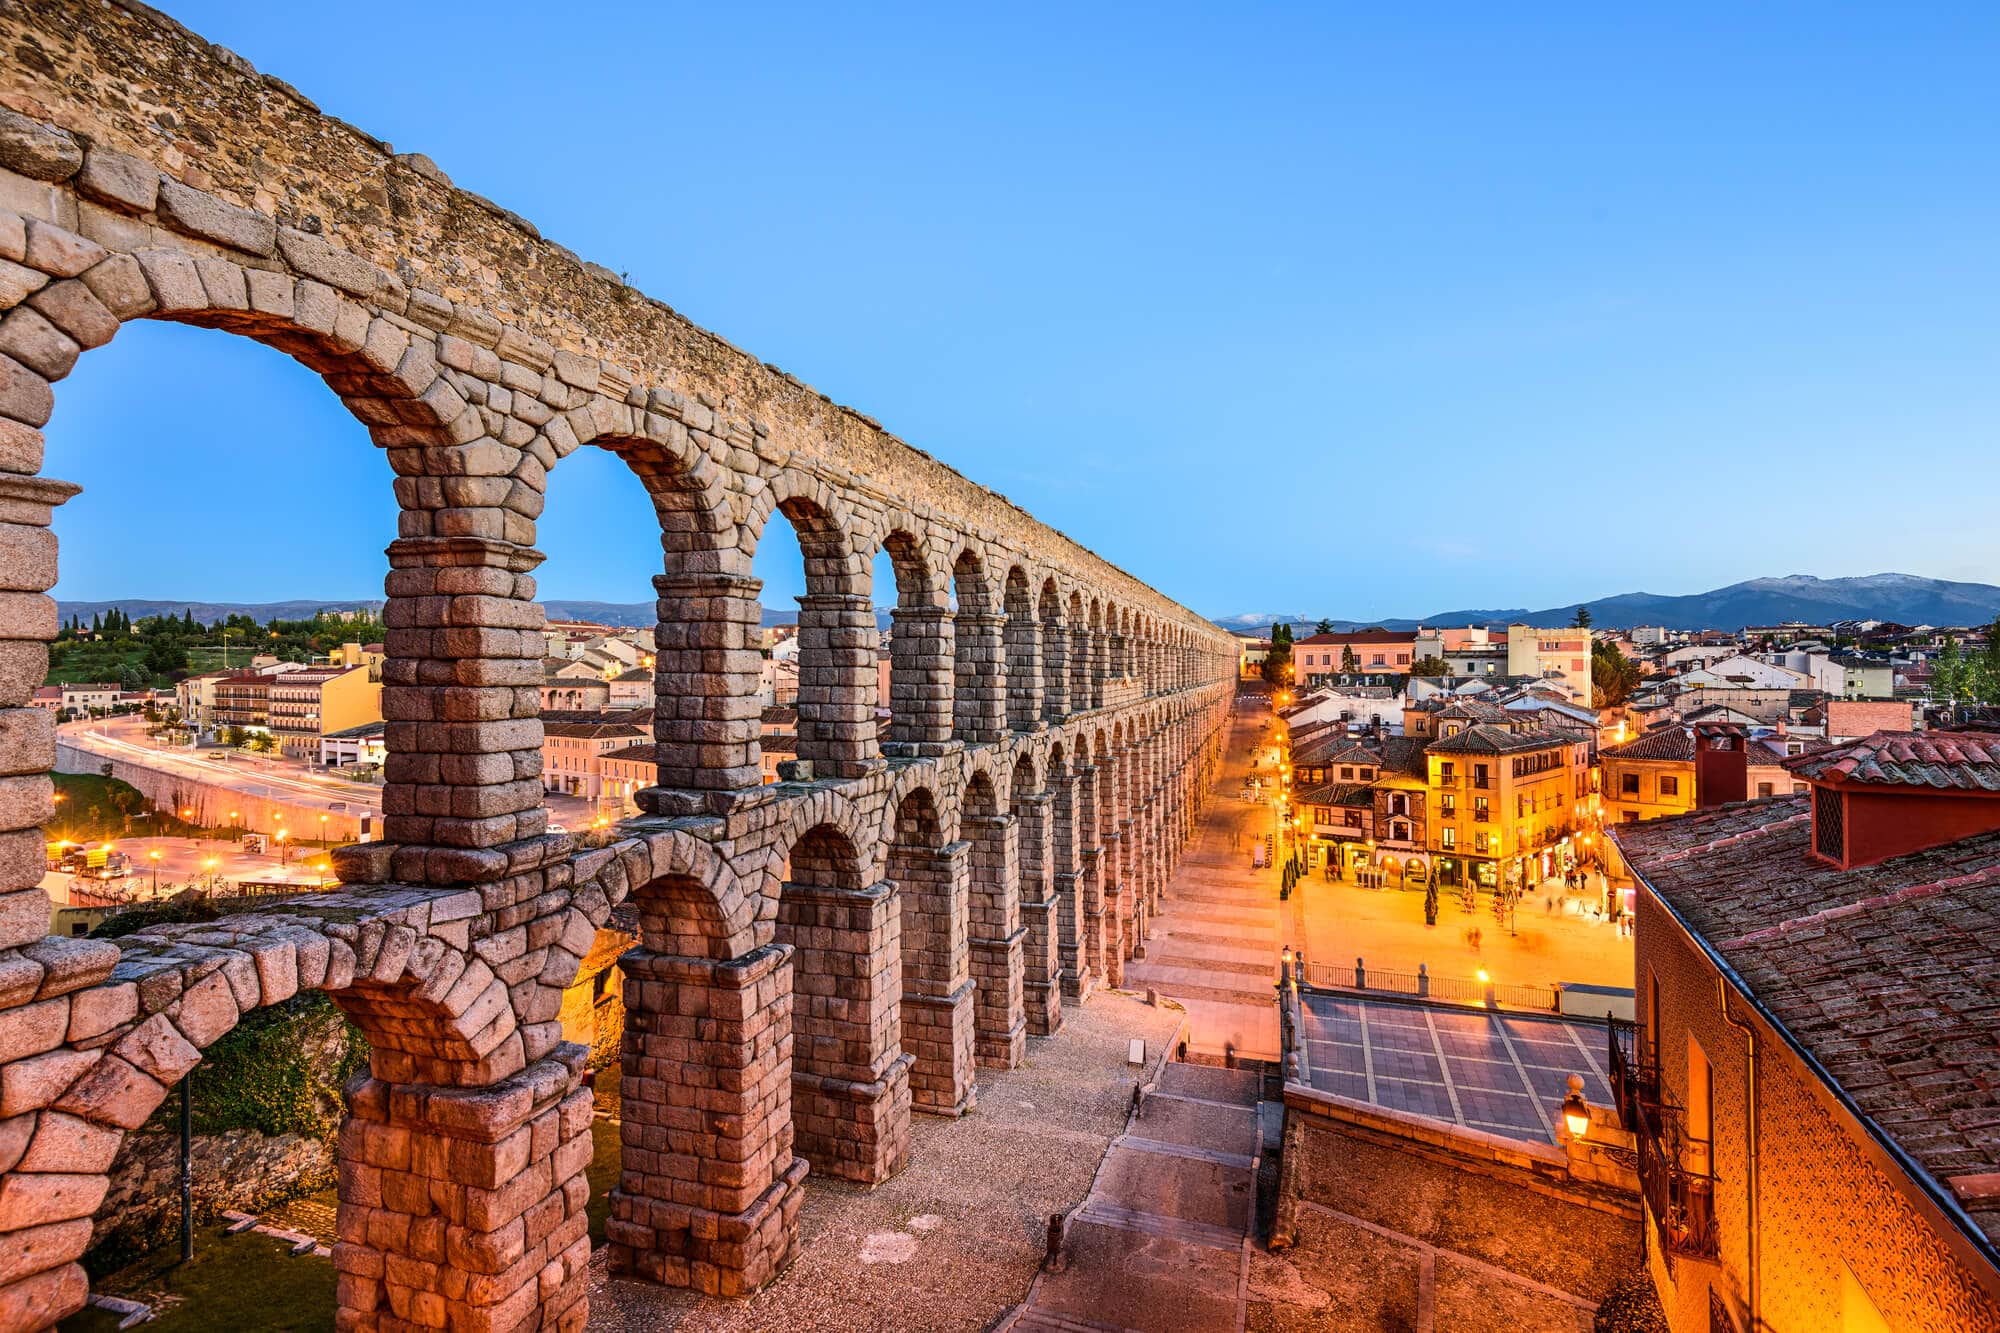 The ancient Roman Aqueduct in Segovia - The Ultimate Spain Bucket List experience